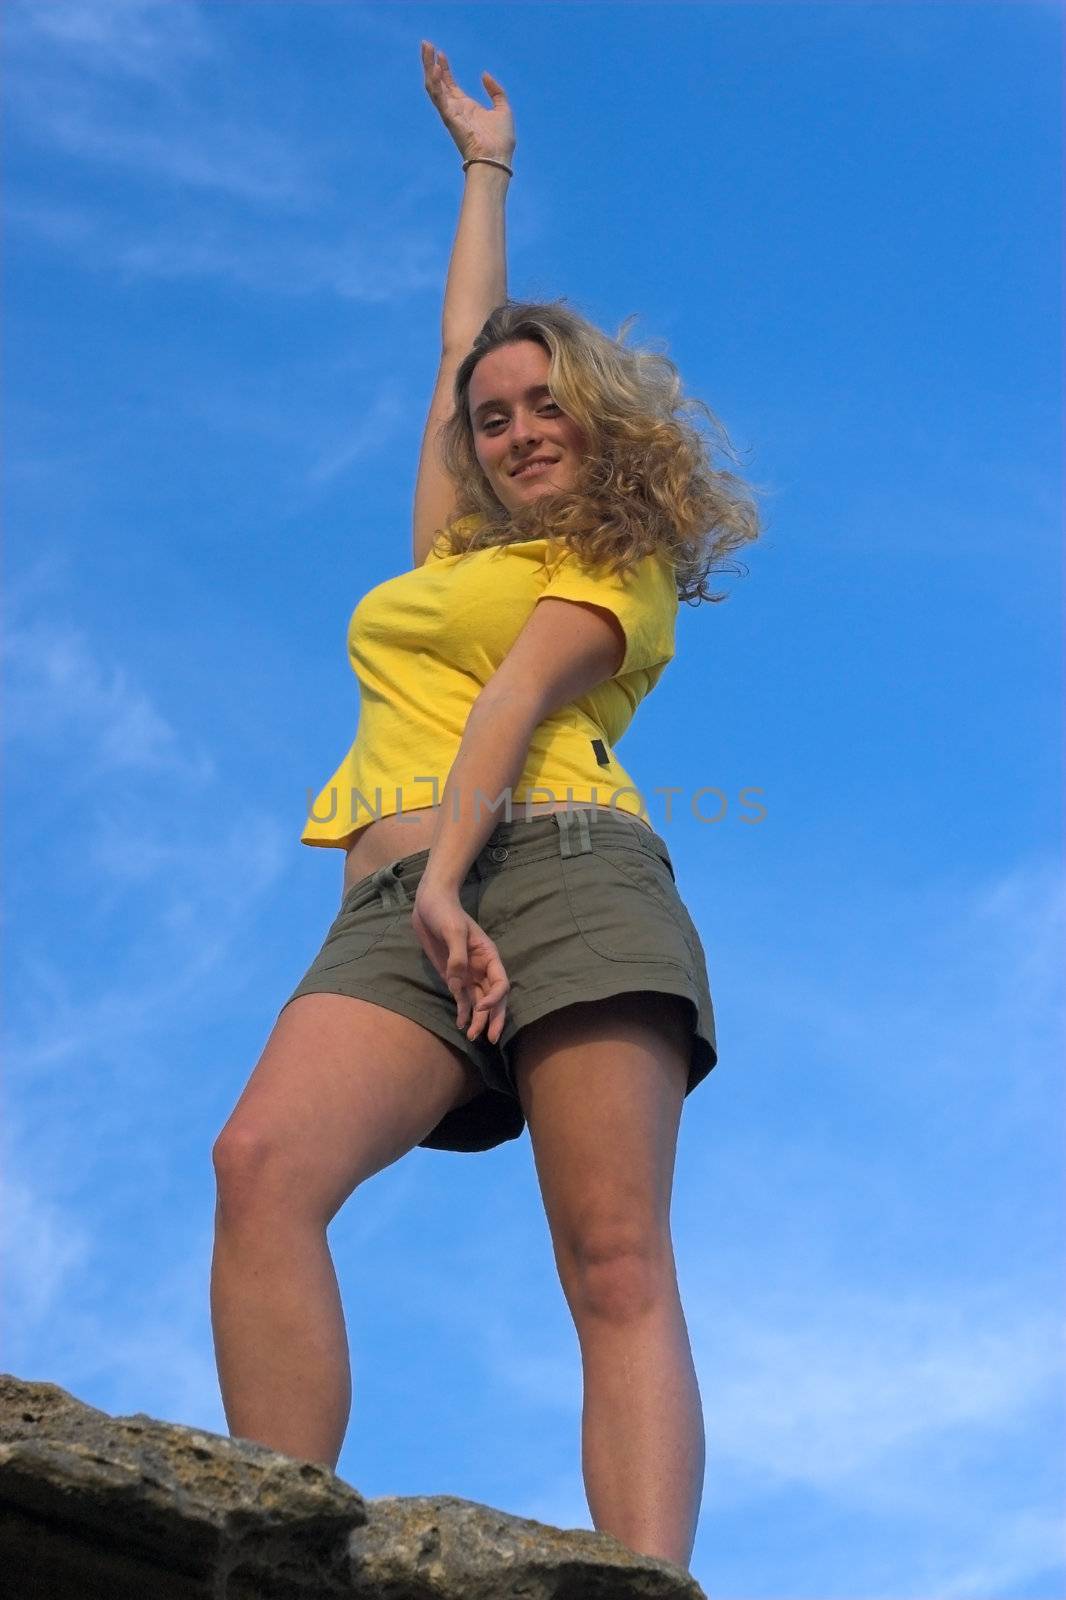 Girl in yellow top and Khaki Shorts